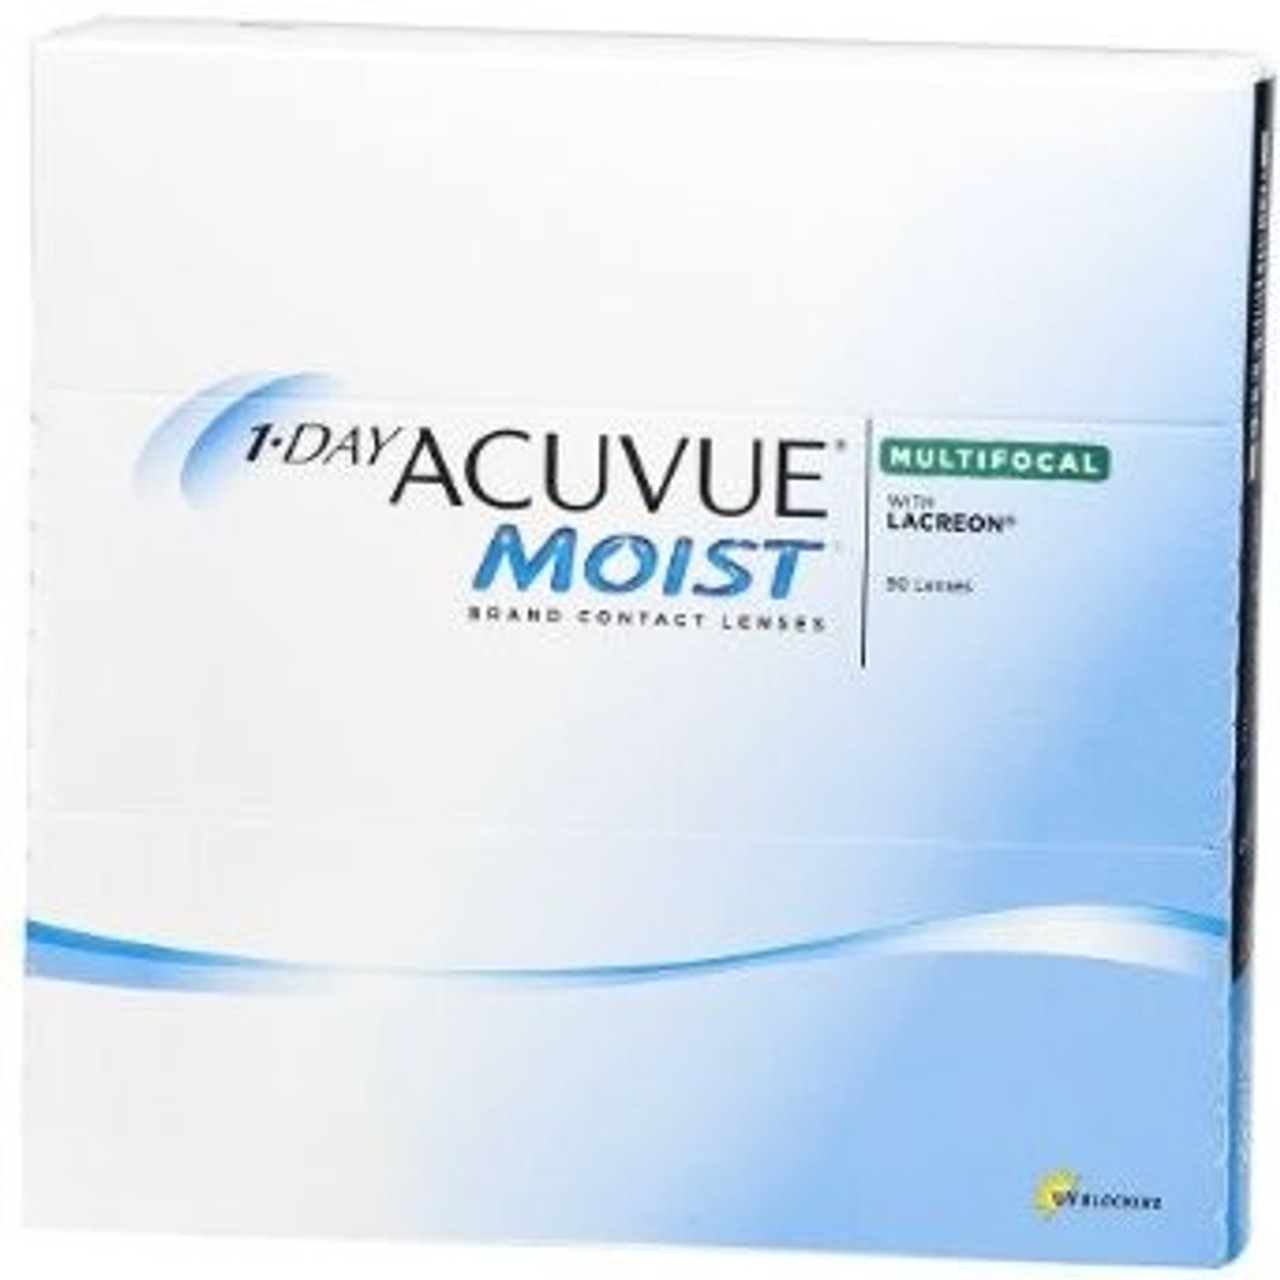 1 Day Acuvue Moist Multifocal 90 Pack 1 Day Acuvue Moist For 